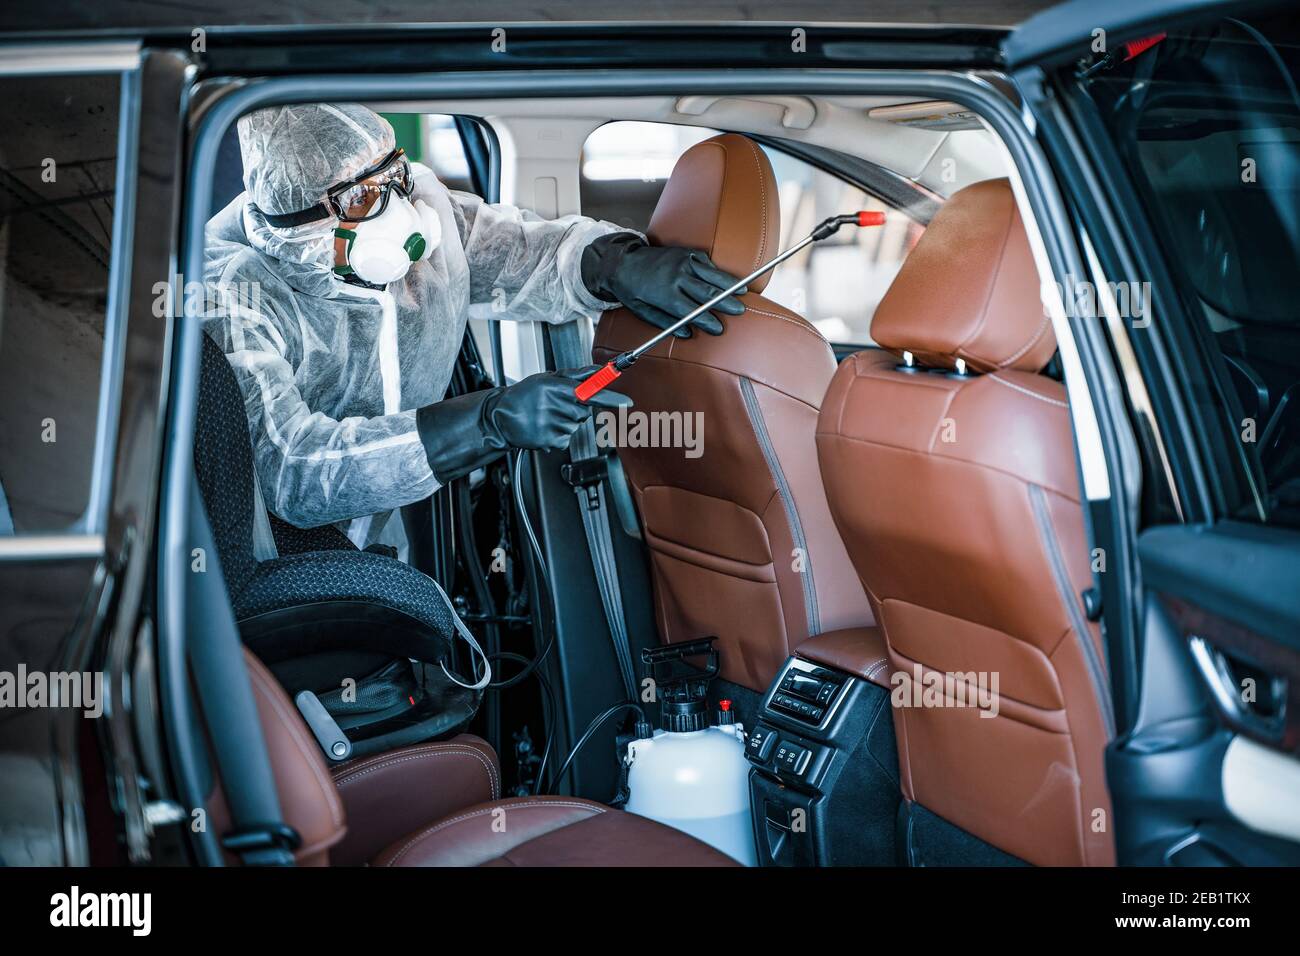 Disinfectant worker in protective mask and suit making disinfection of car seats Stock Photo